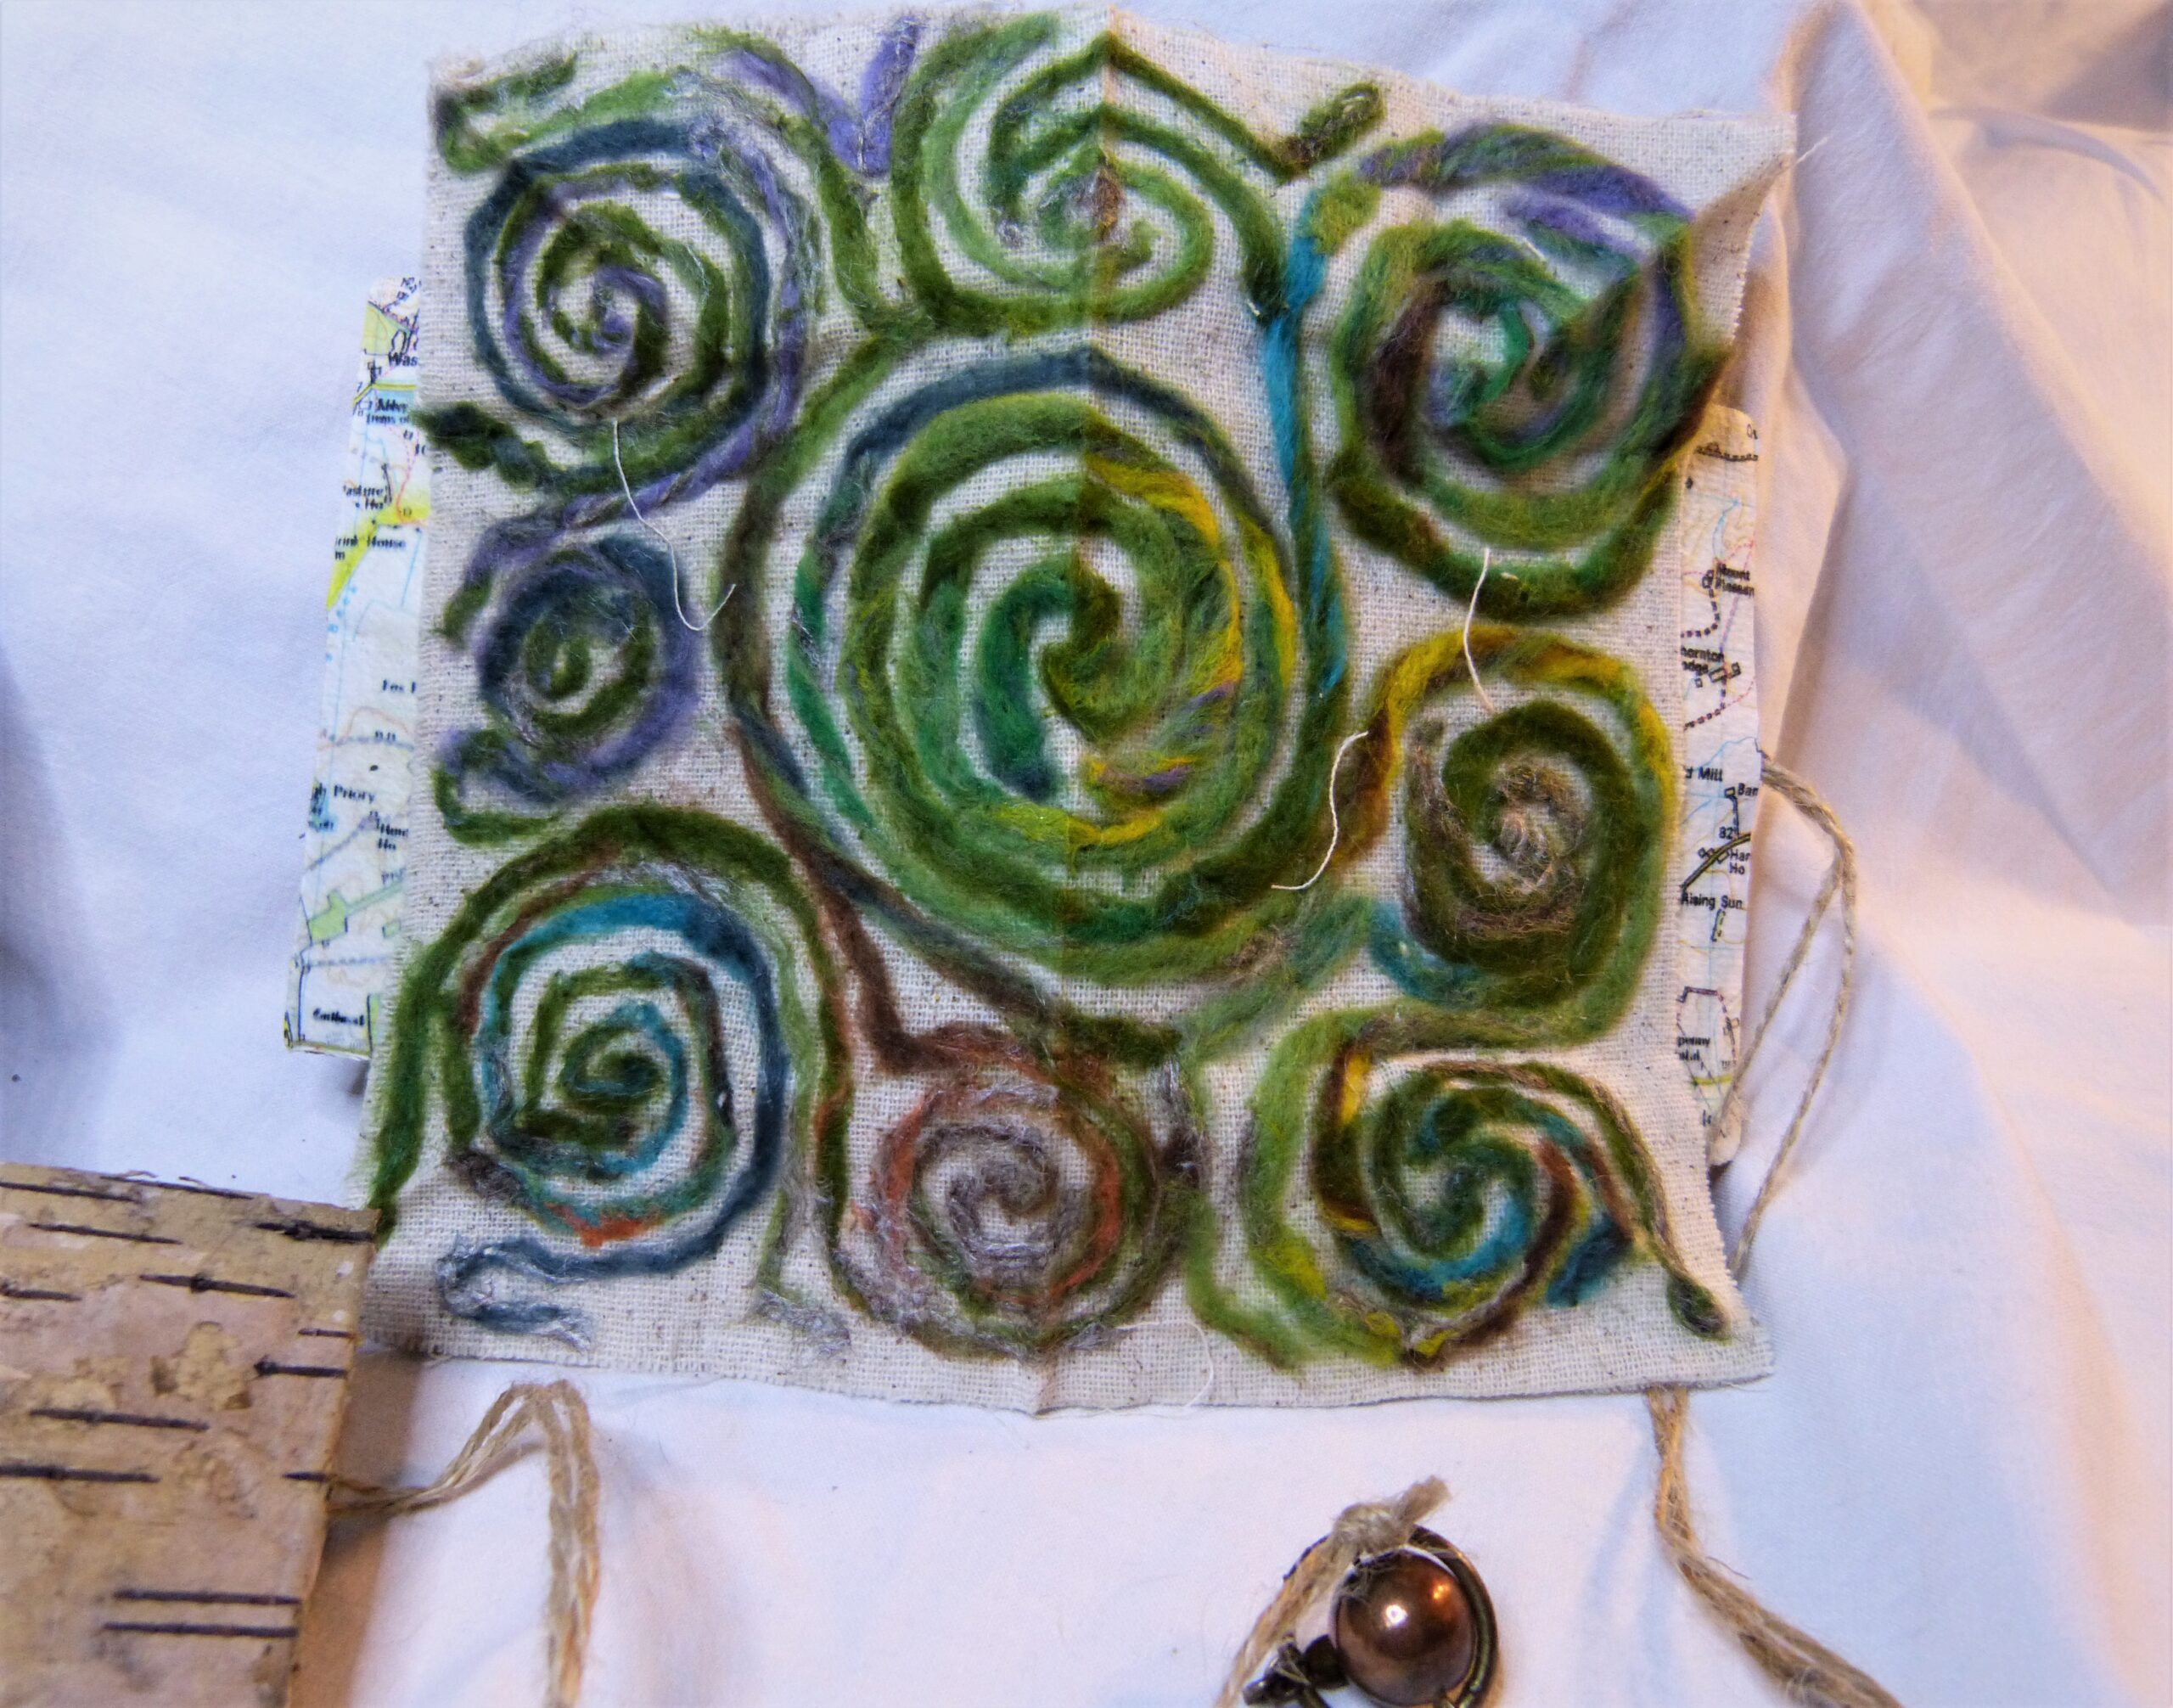 The interior of an artist book shows a circular maze created from twisted felting wool in shades of green and blue